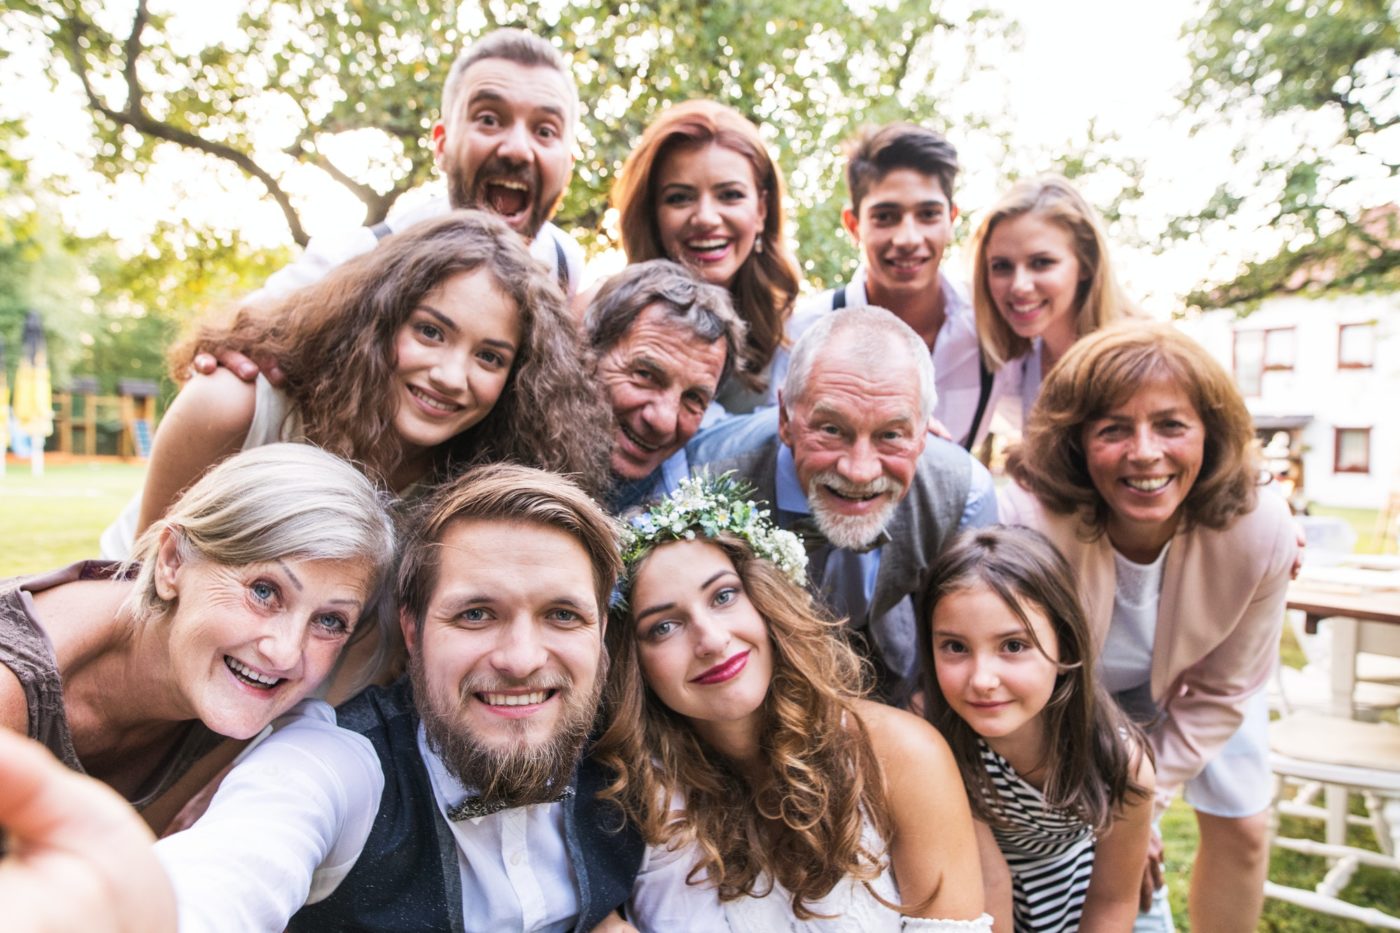 Bride, groom with guests taking selfie at wedding reception outside in the backyard.